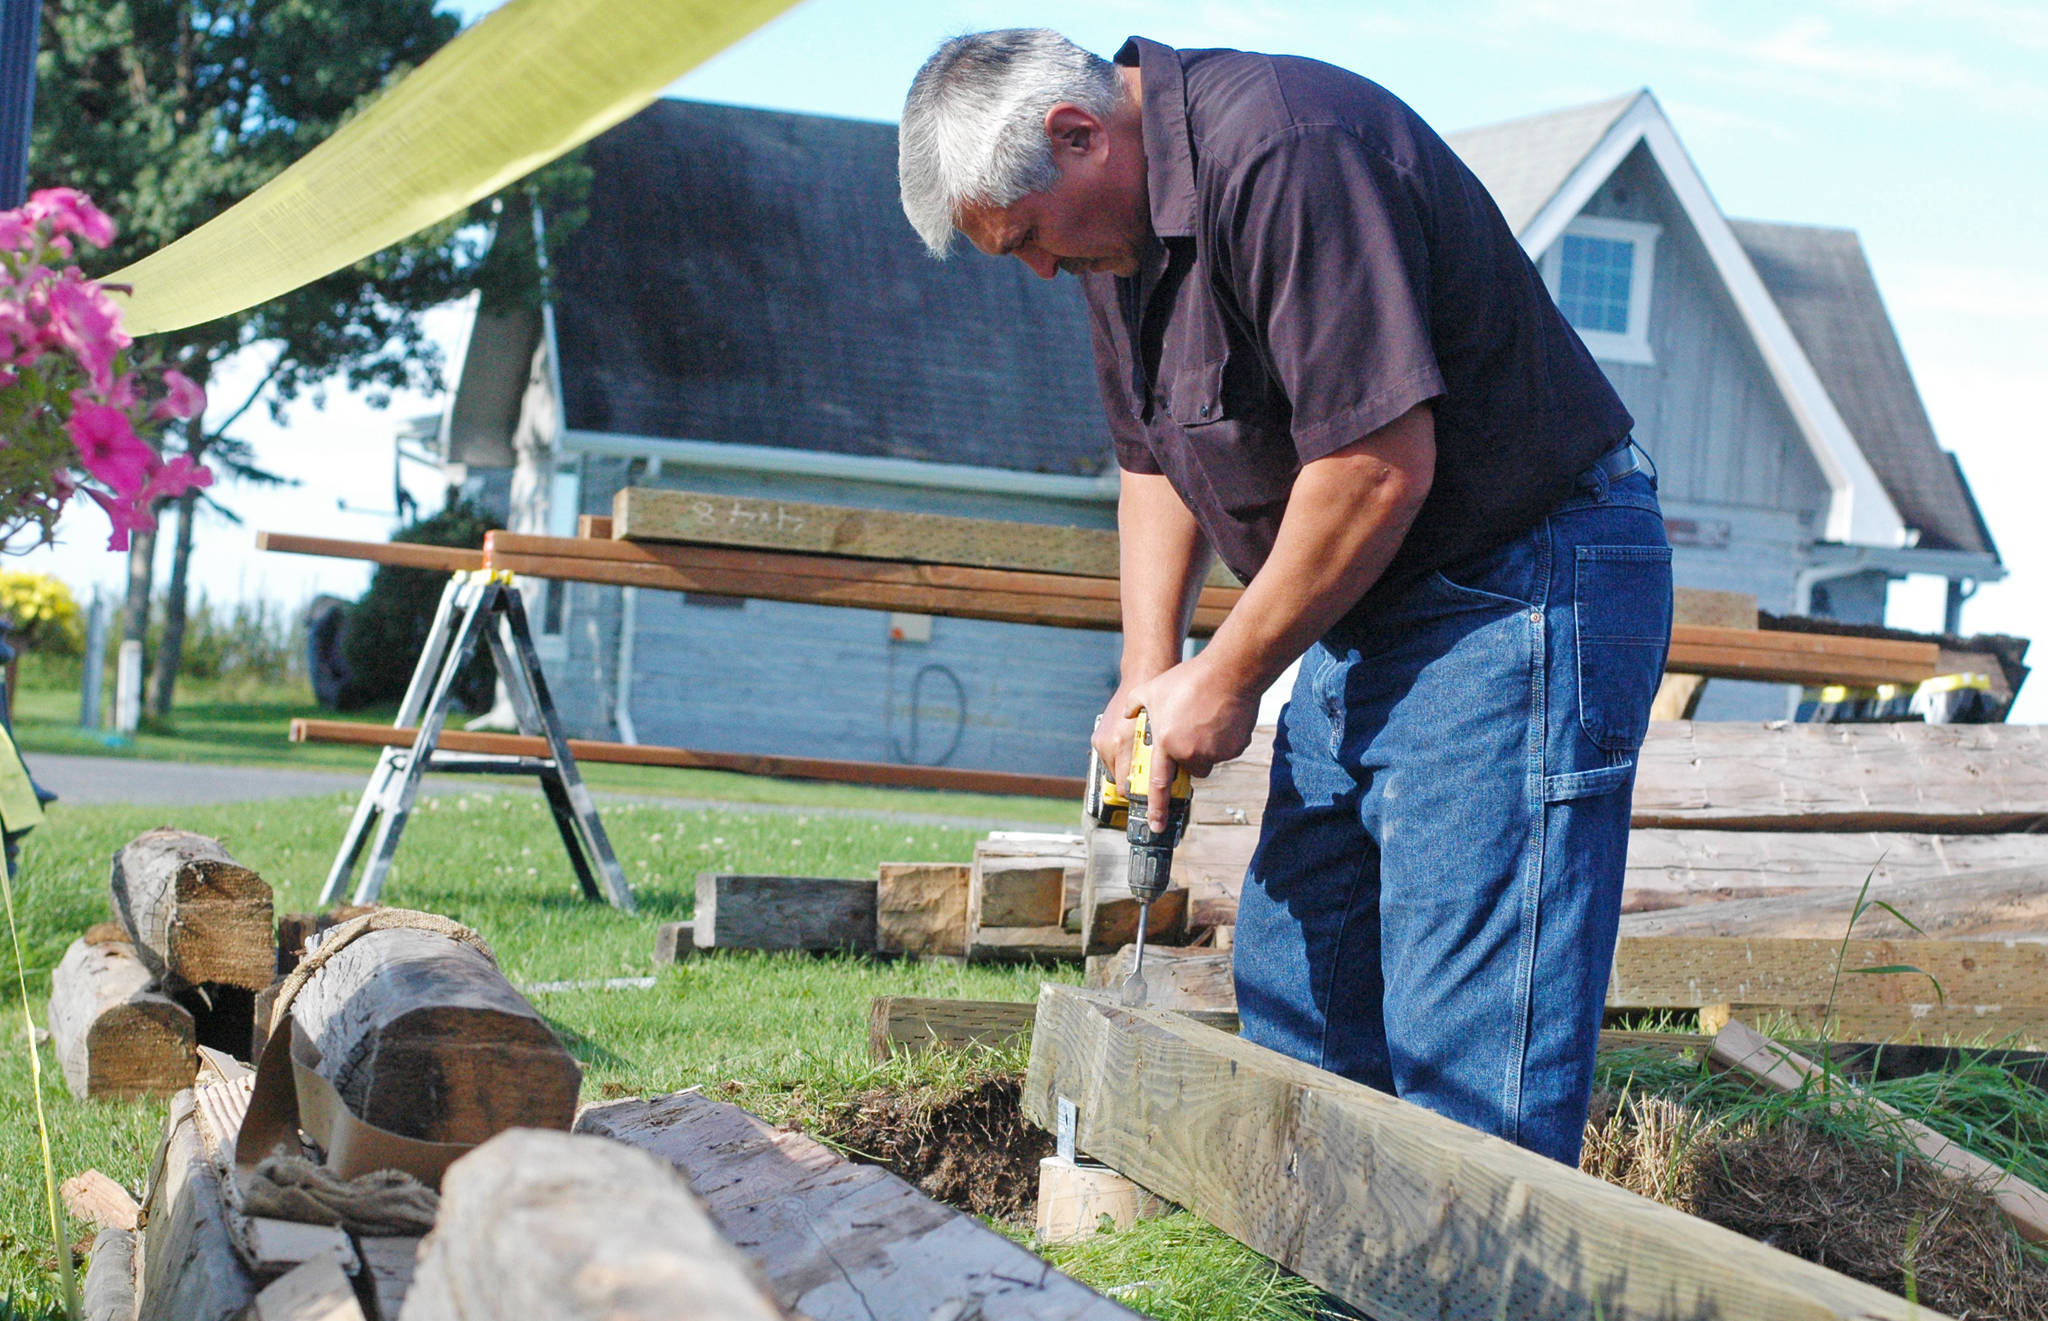 Roy Beaver drills a hole through a log as part of a reconstruction of a historic cabin near the bluff in Old Town Kenai on Wednesday, Aug. 29, 2018 in Kenai, Alaska. The cabin, owned by Tim Wisnewski, is one of the original buildings in the Old Town Kenai area and had long since fallen into disrepair before Wisnewski decided to restore it. (Photo by Elizabeth Earl/Peninsula Clarion)